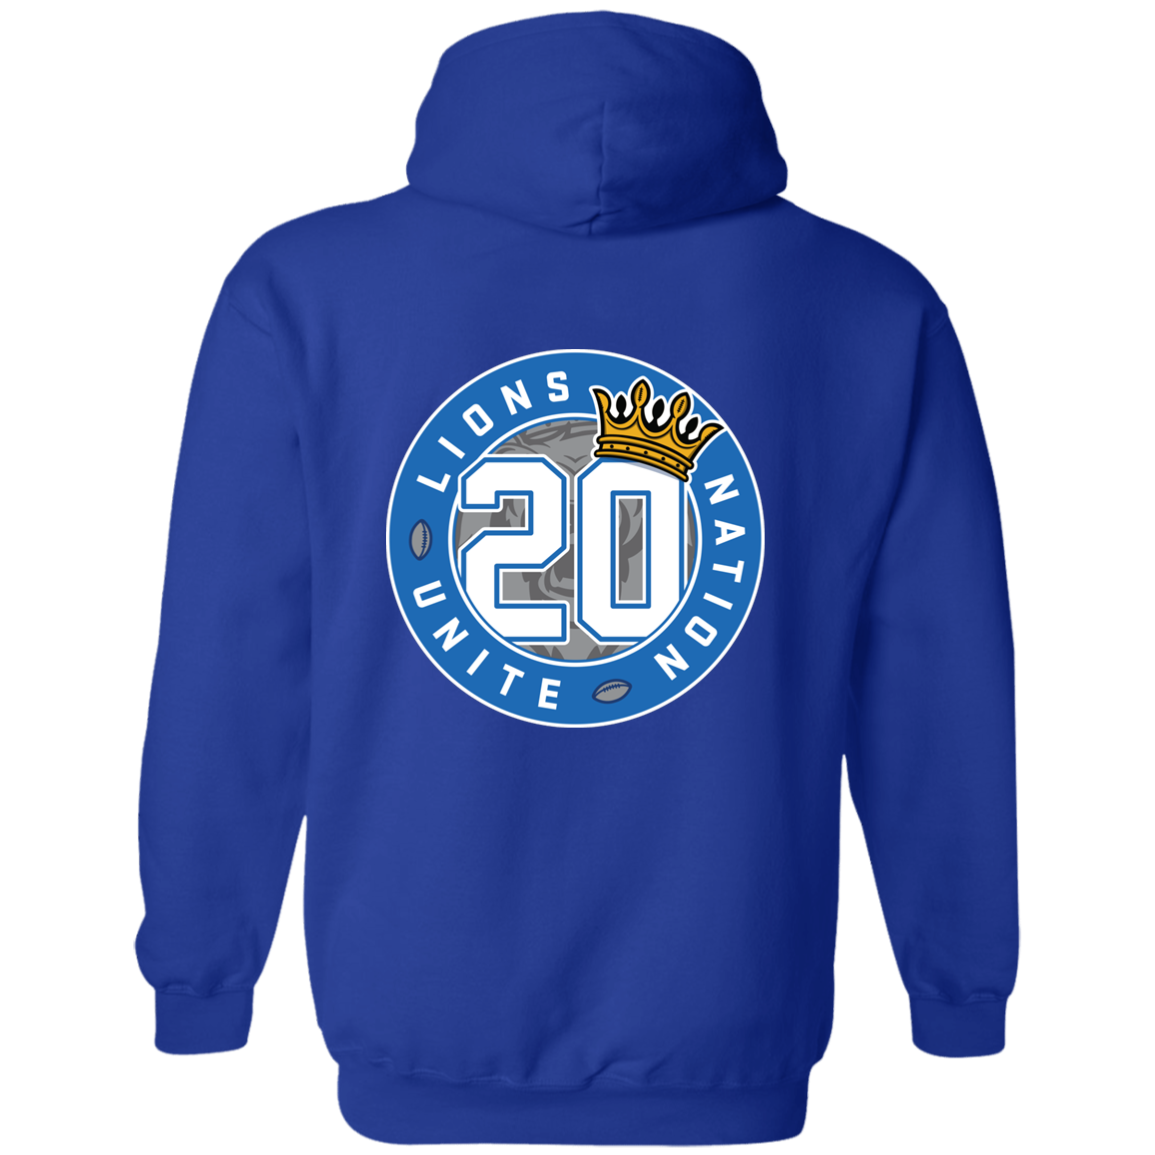 No. 20 - G185 Pullover Hoodie